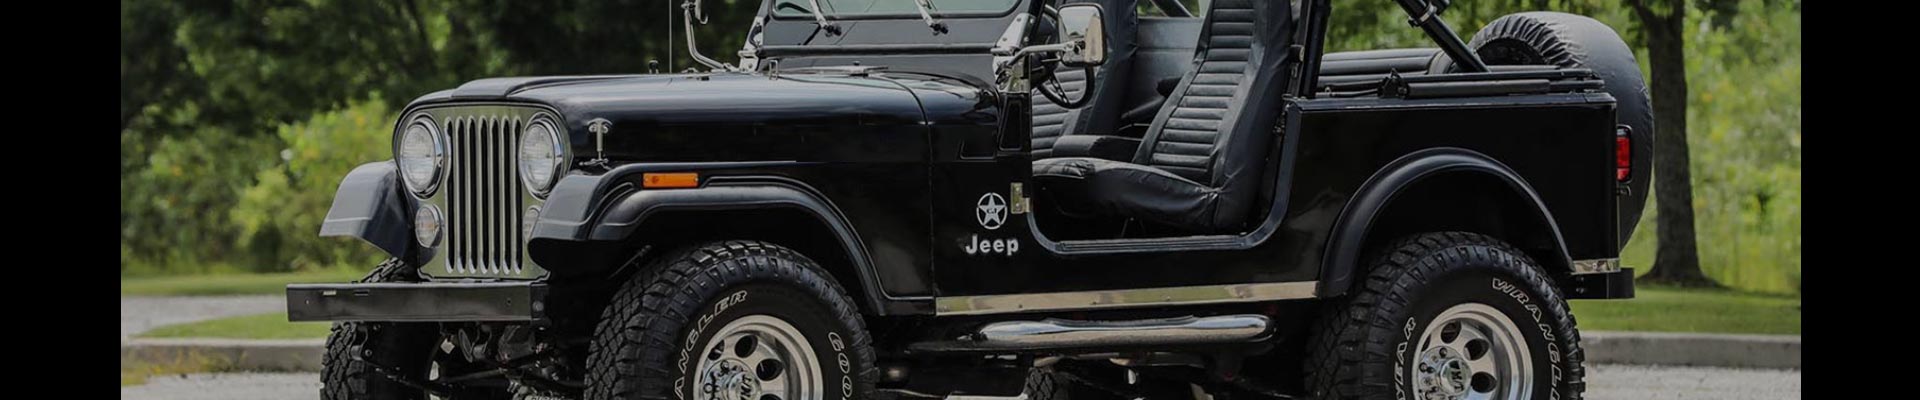 Shop Replacement and OEM Jeep CJ7 Parts with Discounted Price on the Net